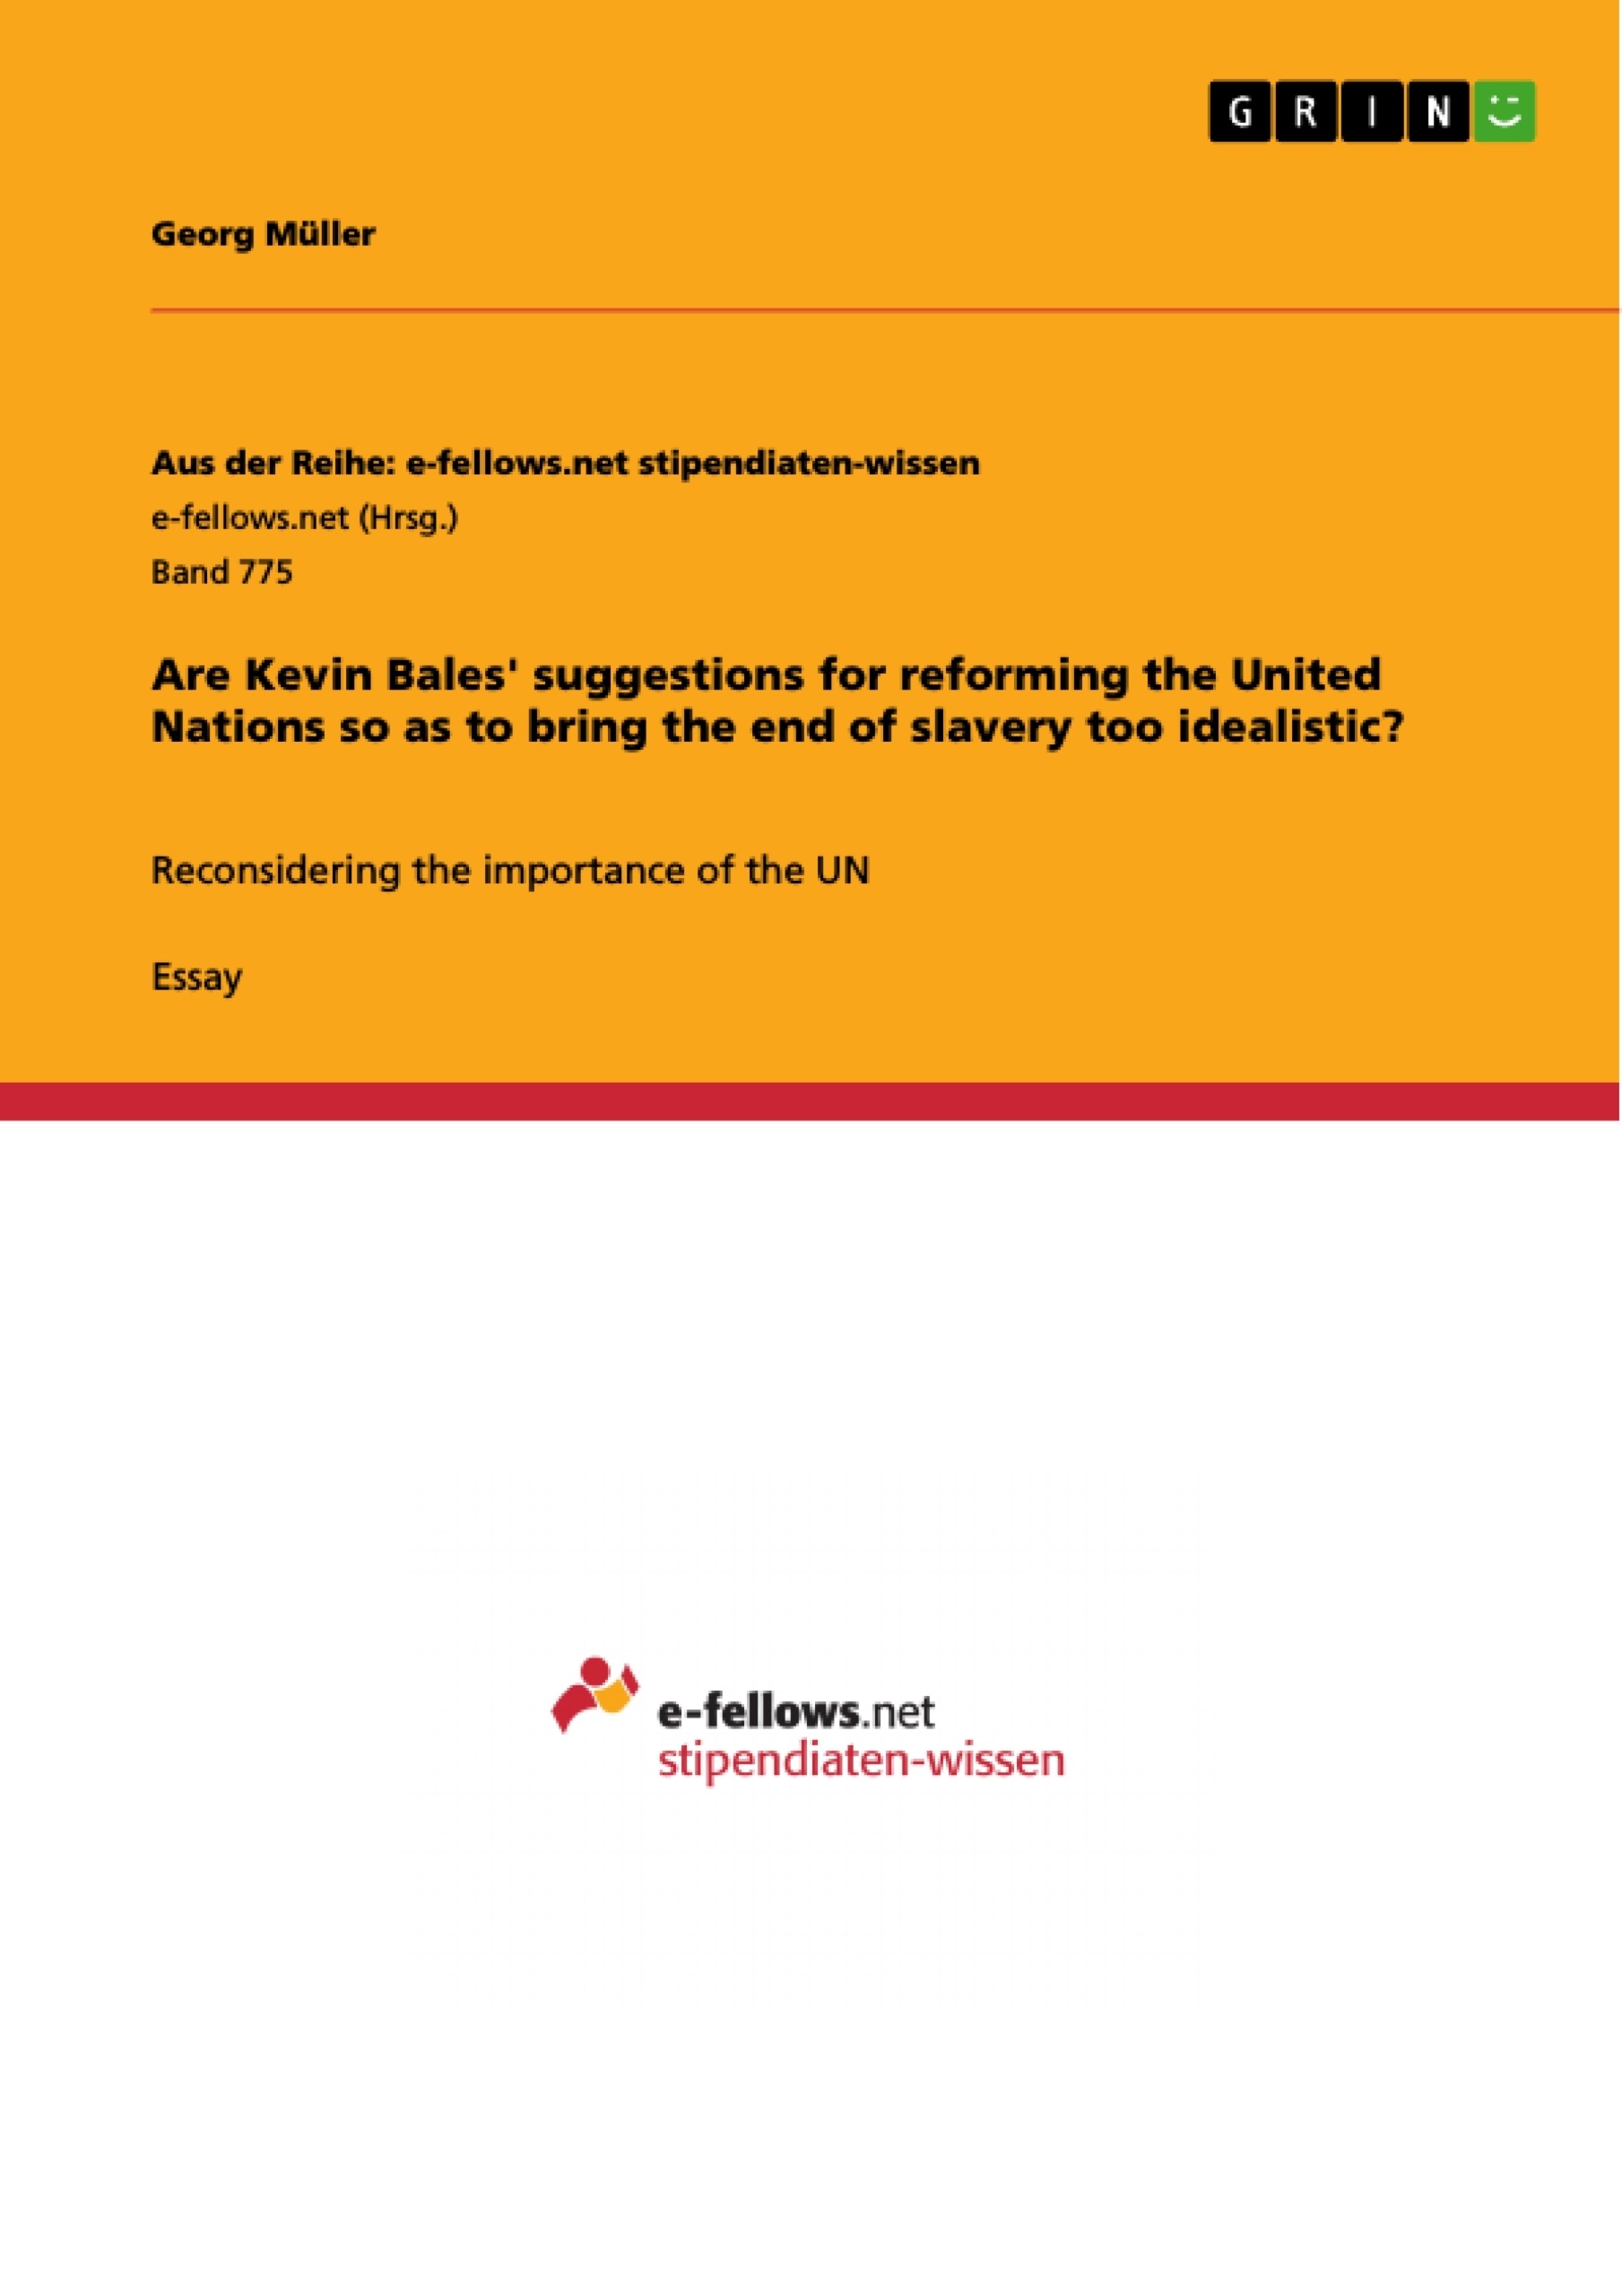 Title: Are Kevin Bales' suggestions for reforming the United Nations so as to bring the end of slavery too idealistic?